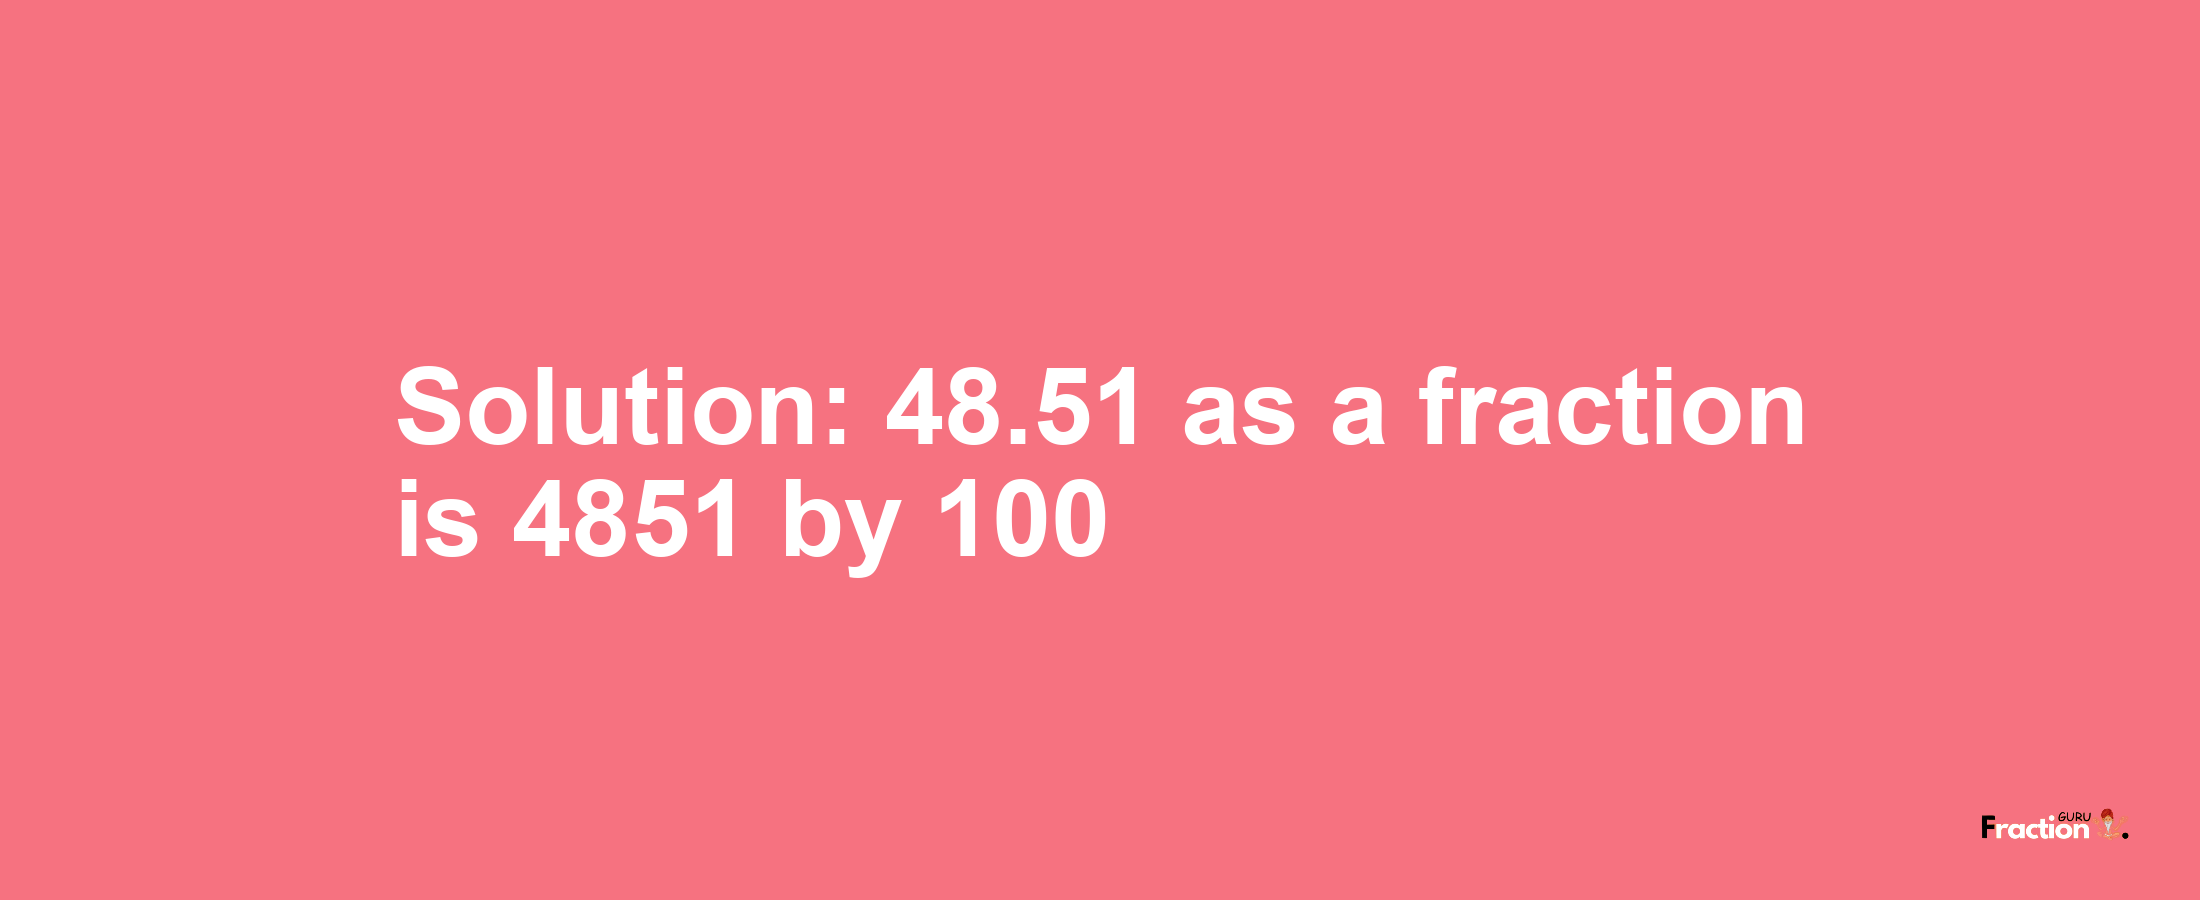 Solution:48.51 as a fraction is 4851/100